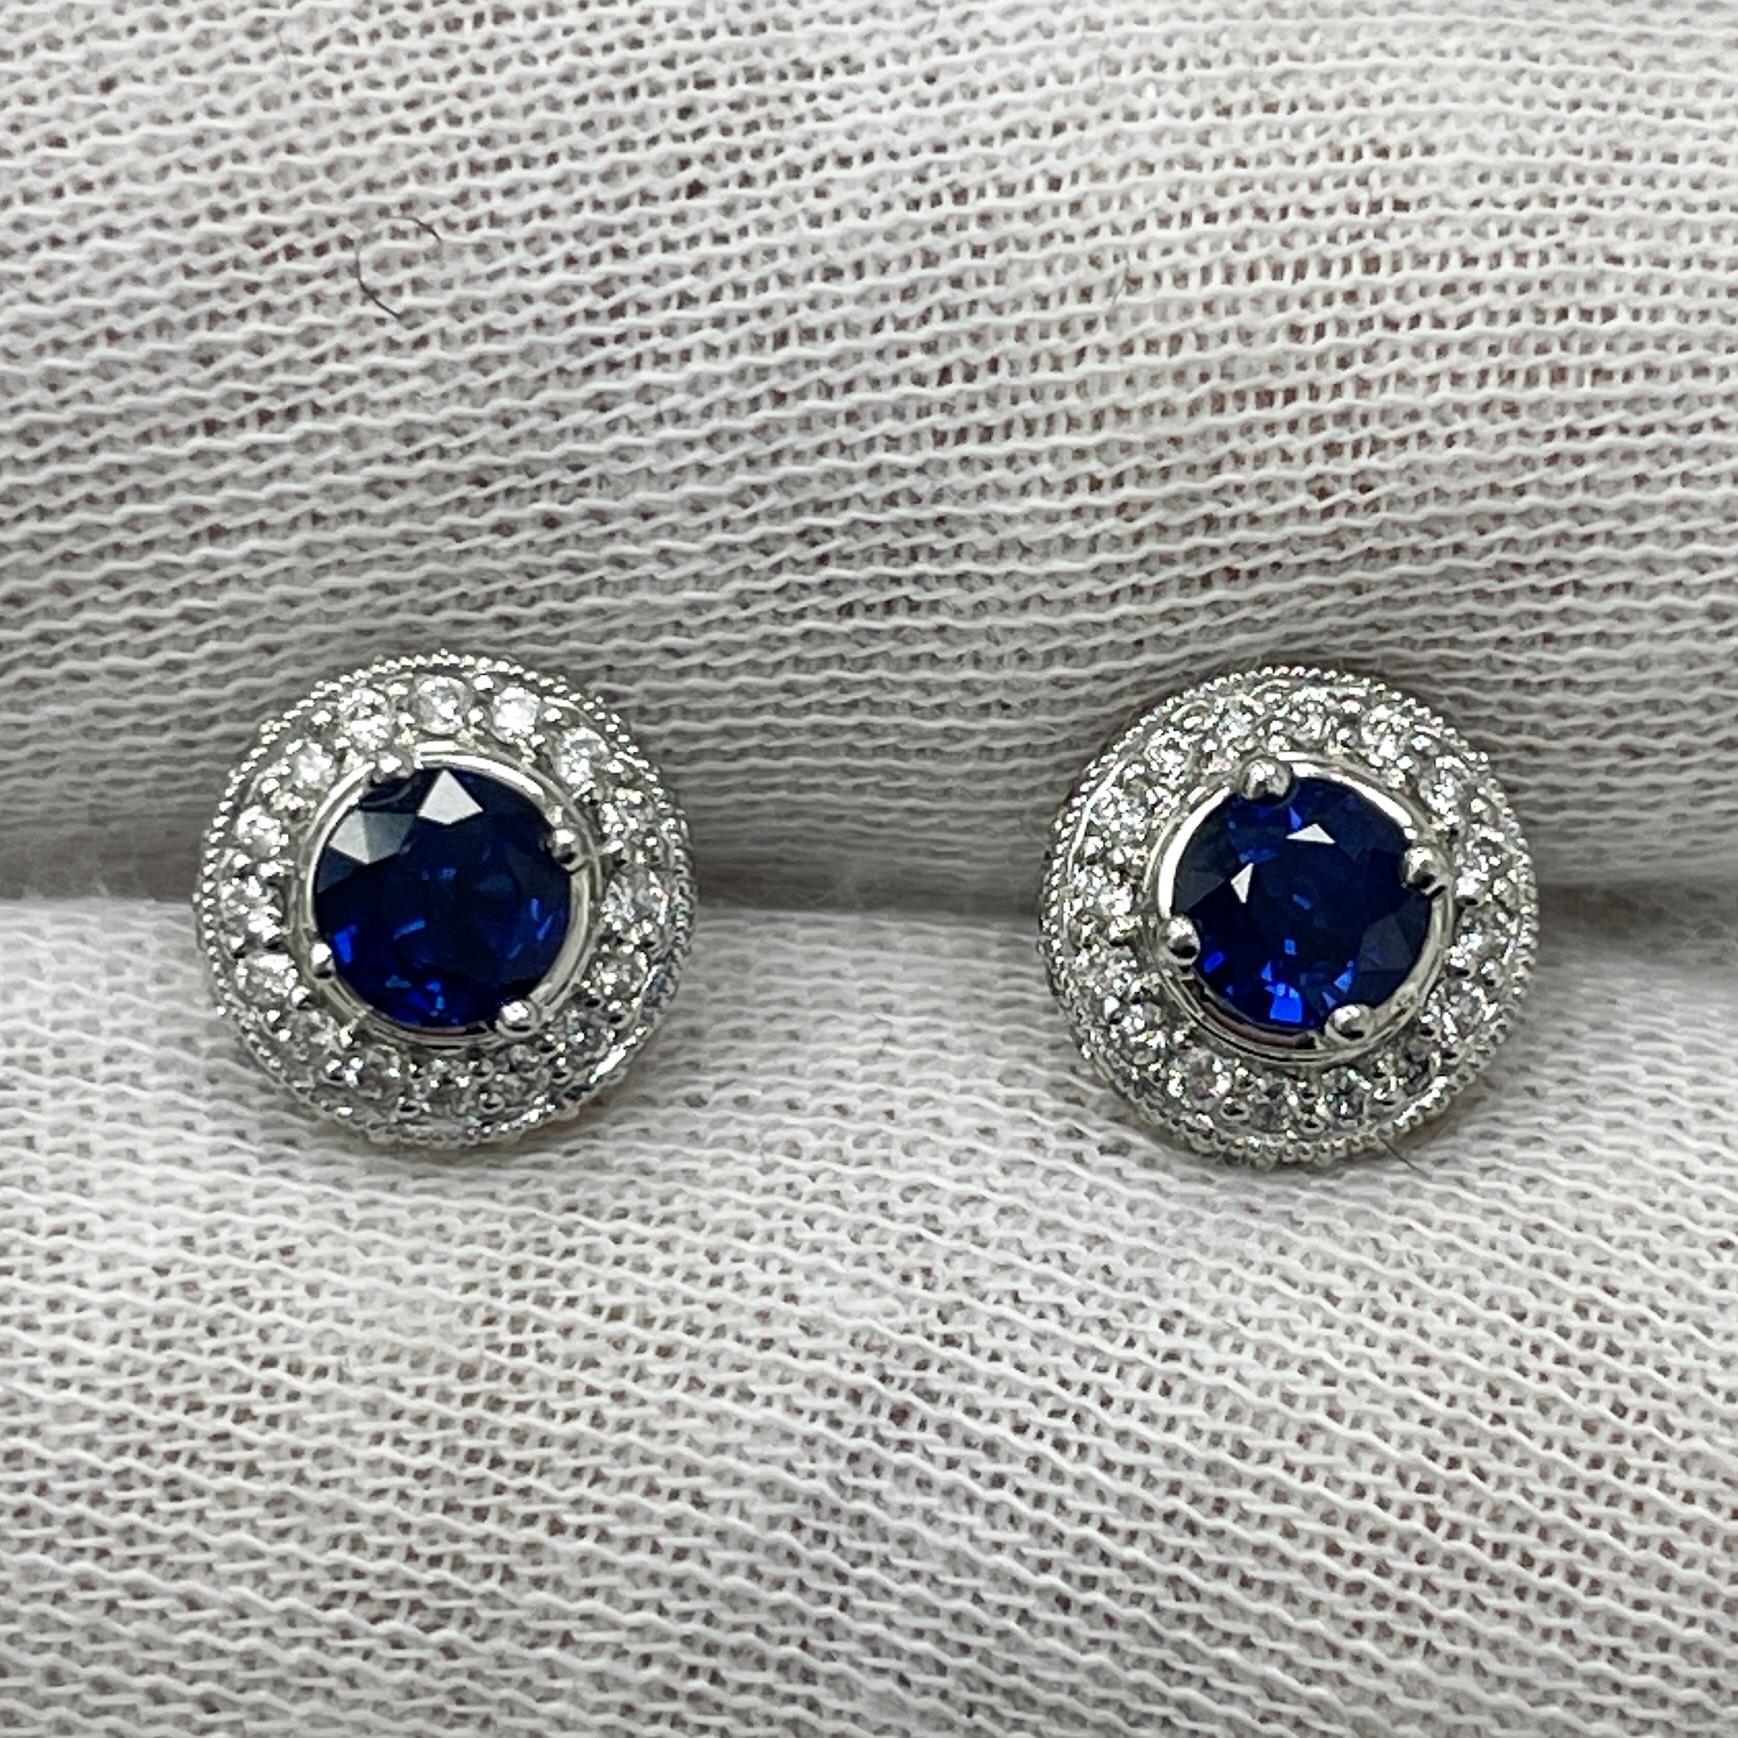 These studs are 18K white gold and carry .46Ct of brilliant white diamonds with 1.13Ct of 4.5MM royal blue sapphires